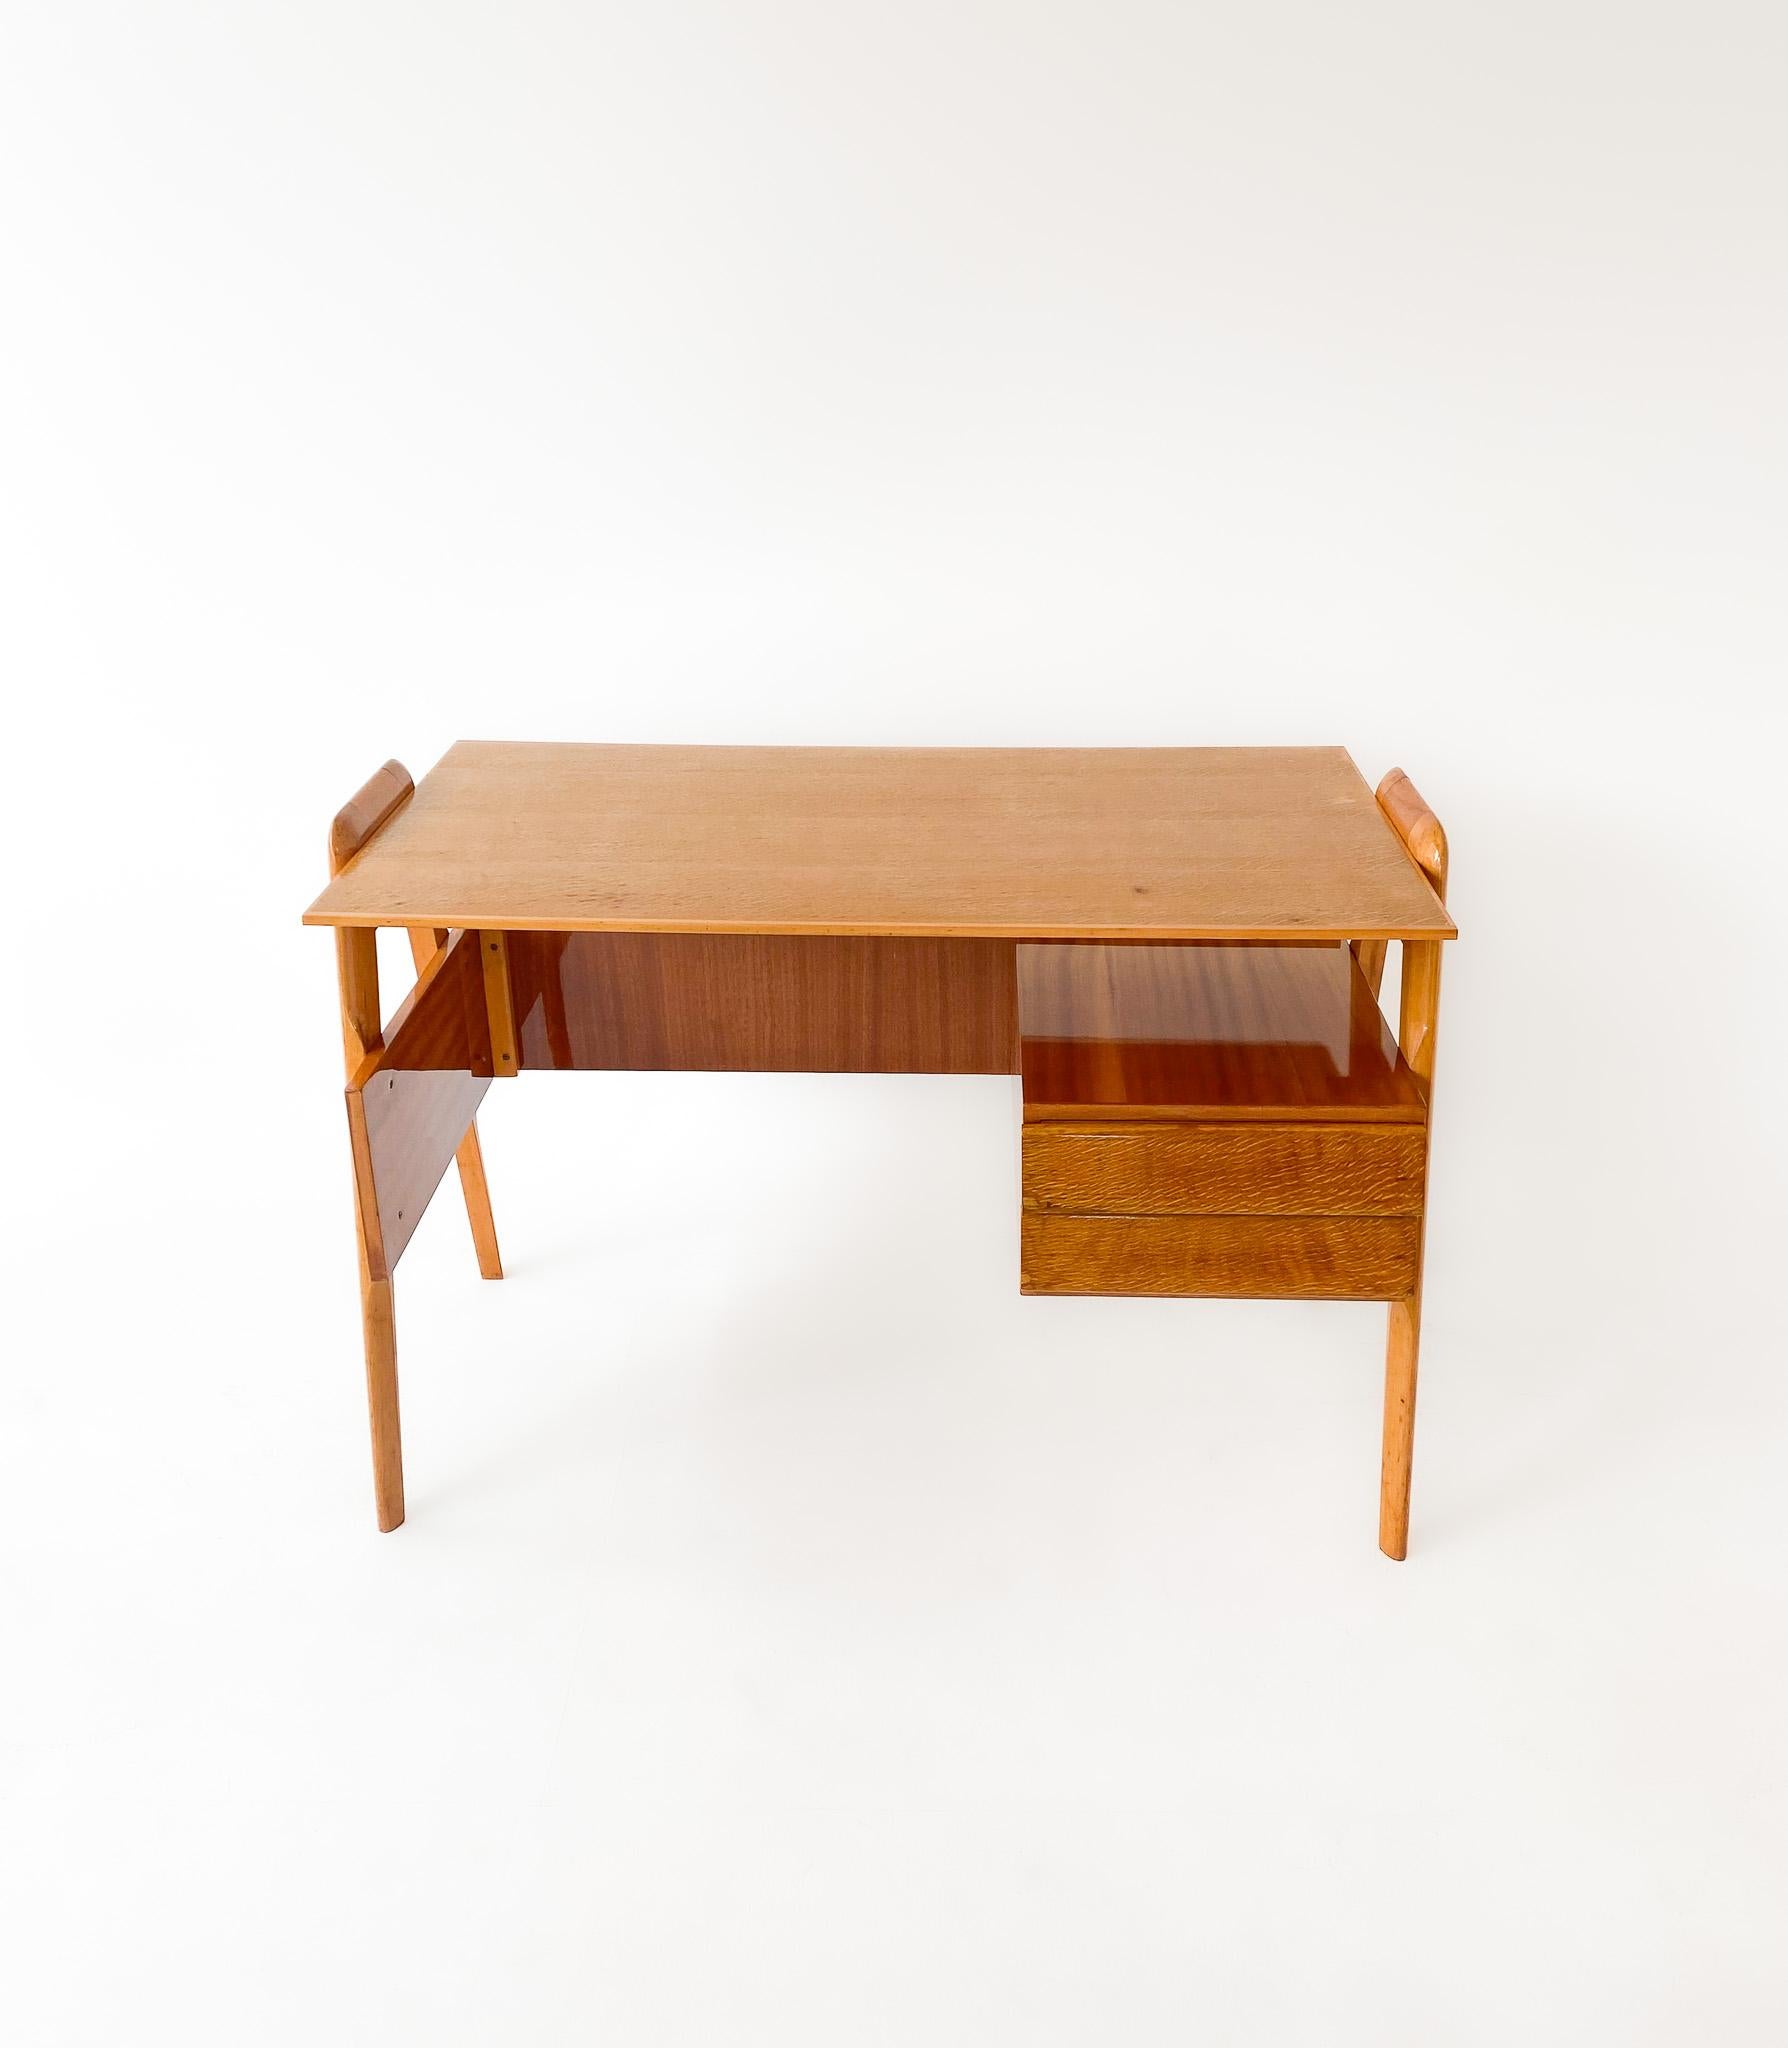 Mid Century Modern Wooden Desk by Vittorio Dassi, Italy 1950s.

Wonderful desk by the Italian designer Vittorio Dassi in a minimal rational shape. Elegant in design without losing the functional quality. Manufactured by Dassi Mobili Moderni and made